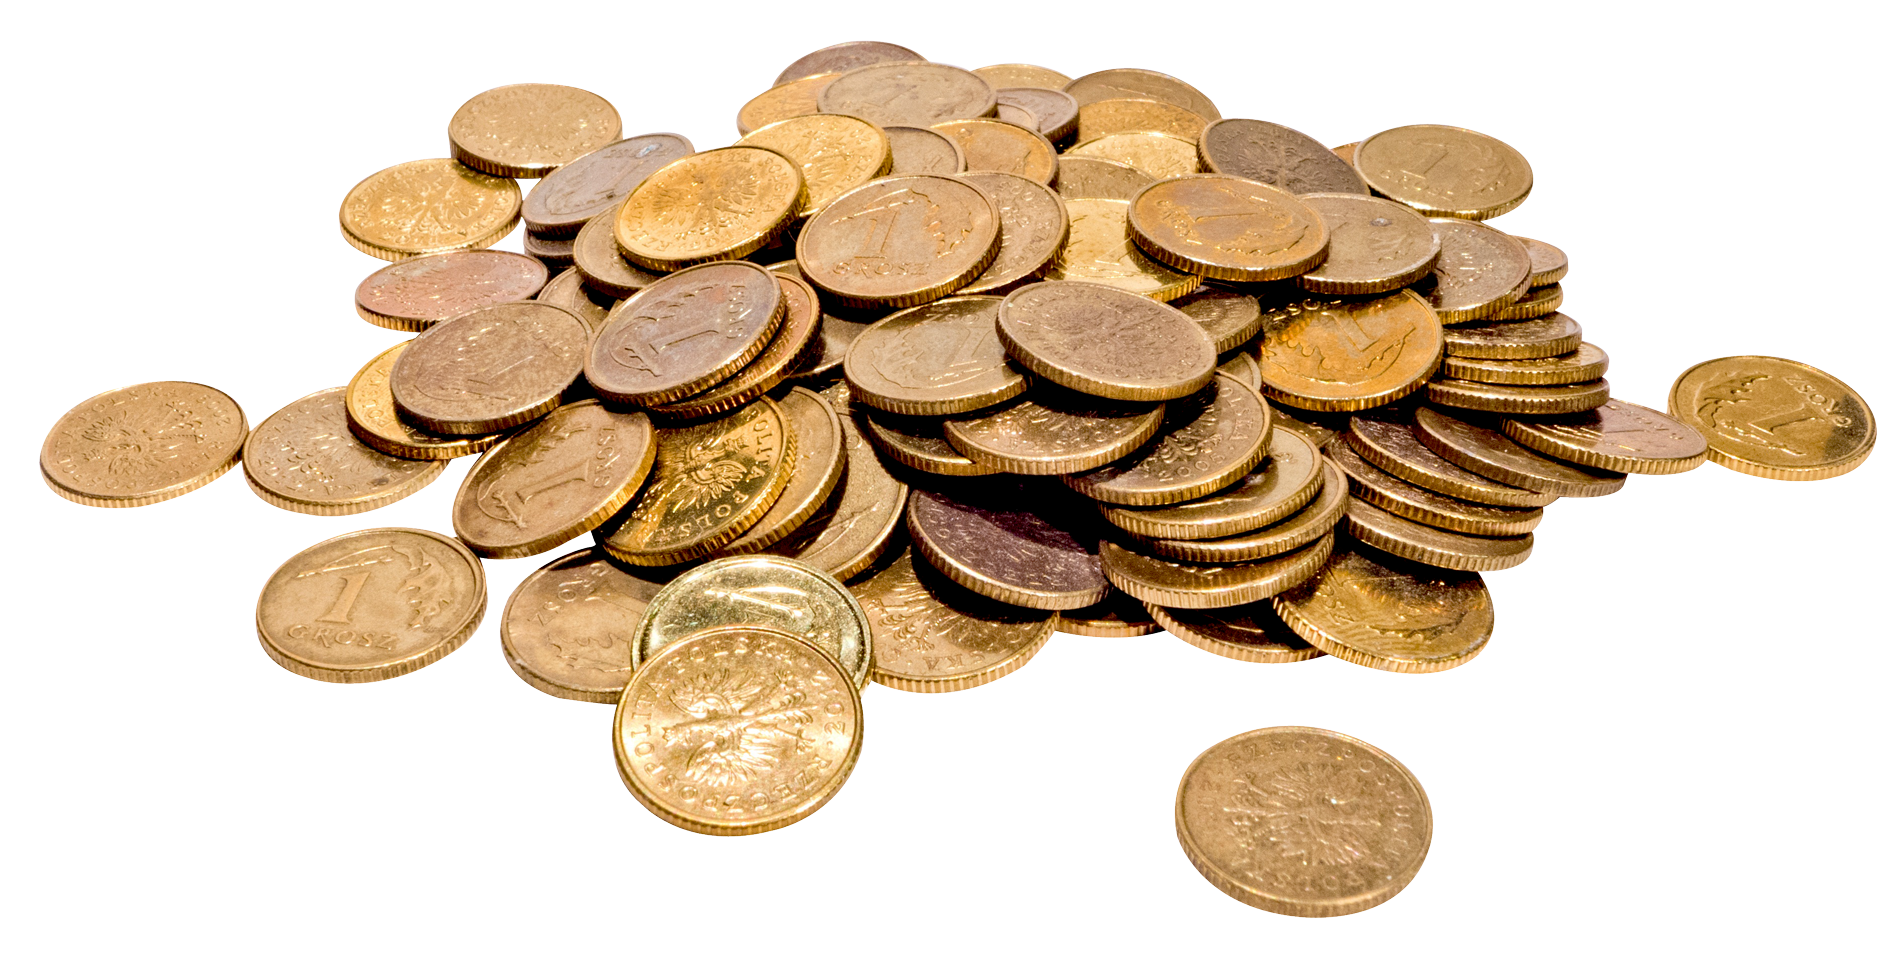 Money Coins Png Transparent Image - Coin, Transparent background PNG HD thumbnail